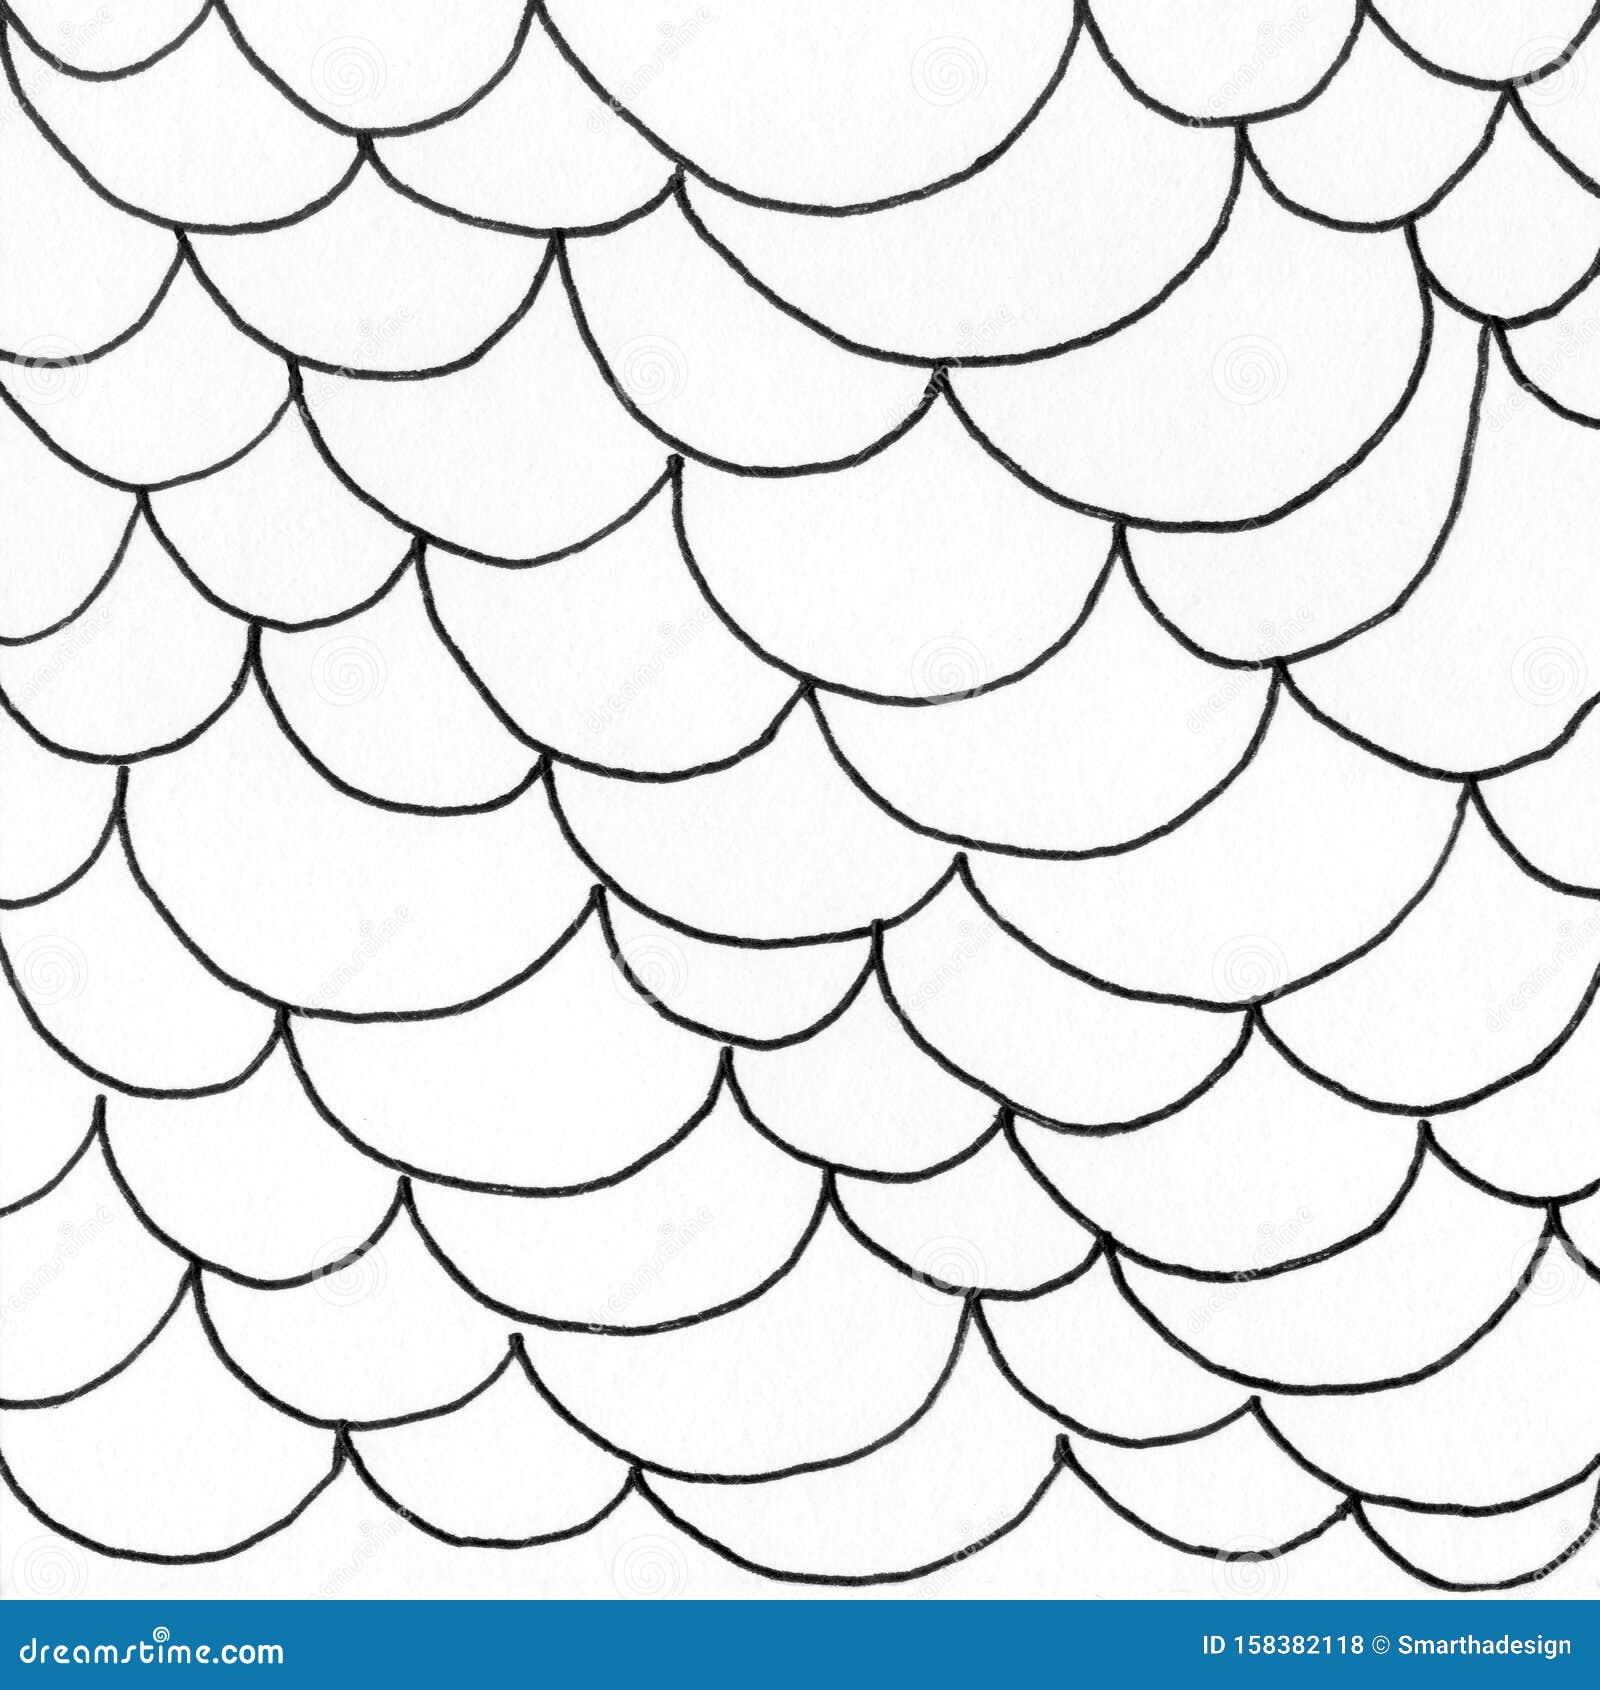 Fish Scales Ink Texture. Abstract Black and White Hand Drawn